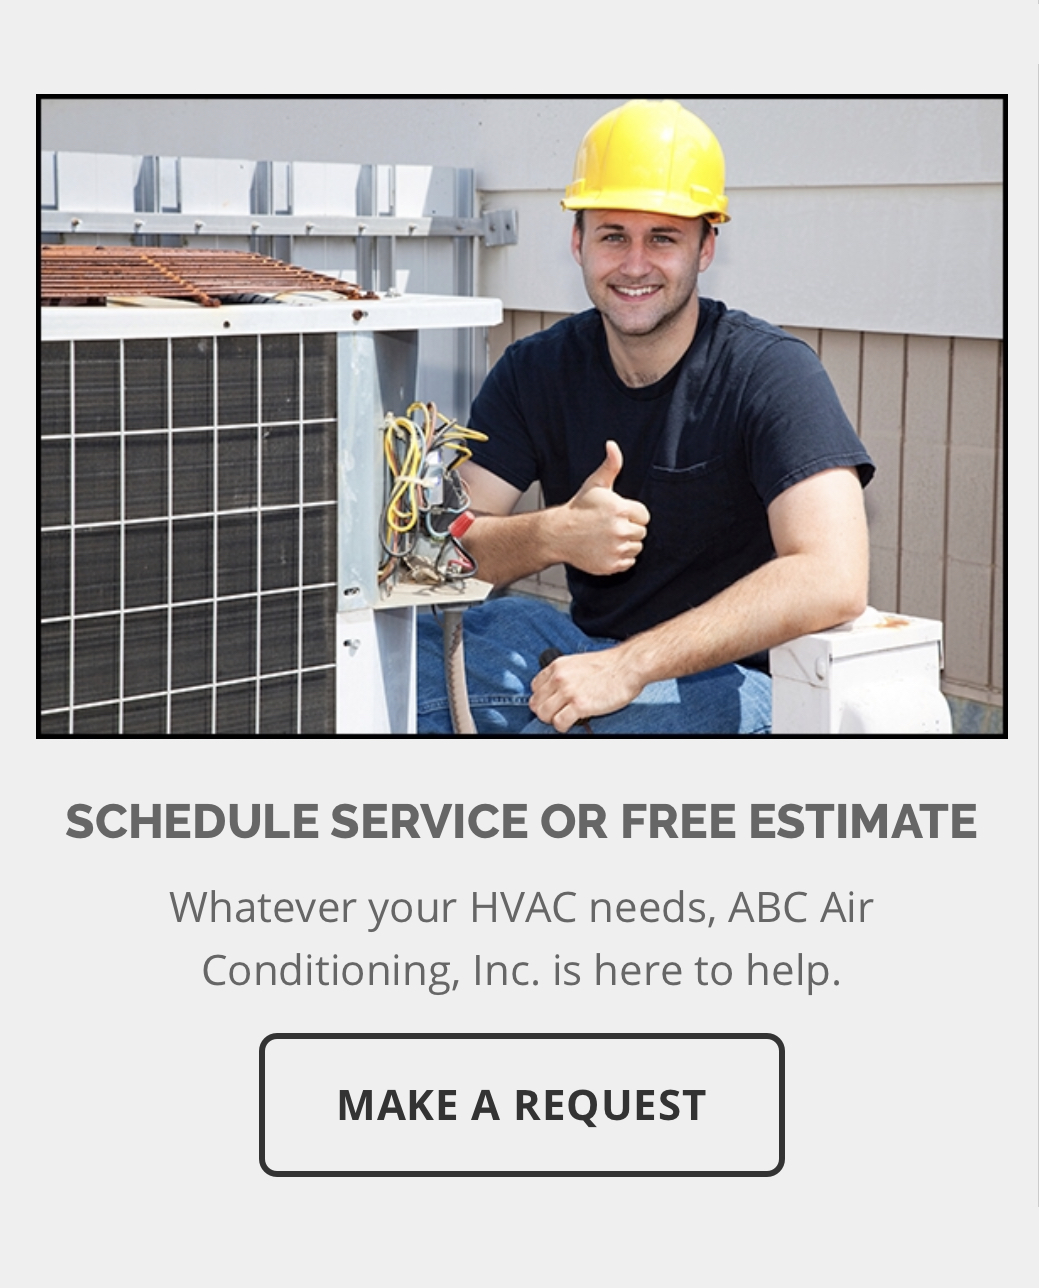 ABC Air Conditioning, Inc. reviews